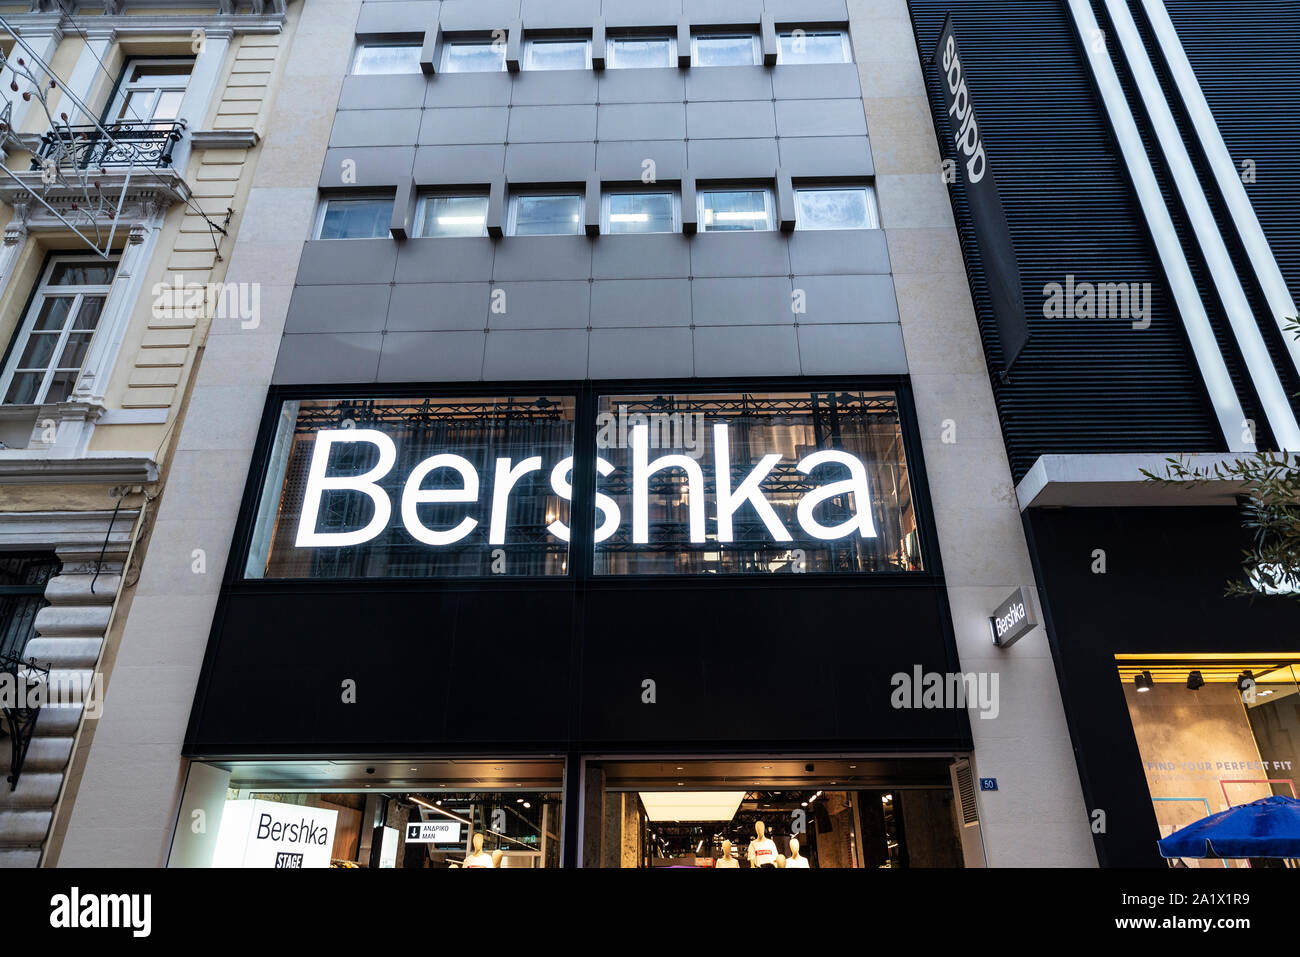 Athens, Greece - January 4, 2019: Display of a Bershka store at night in Athens, Greece Stock Photo